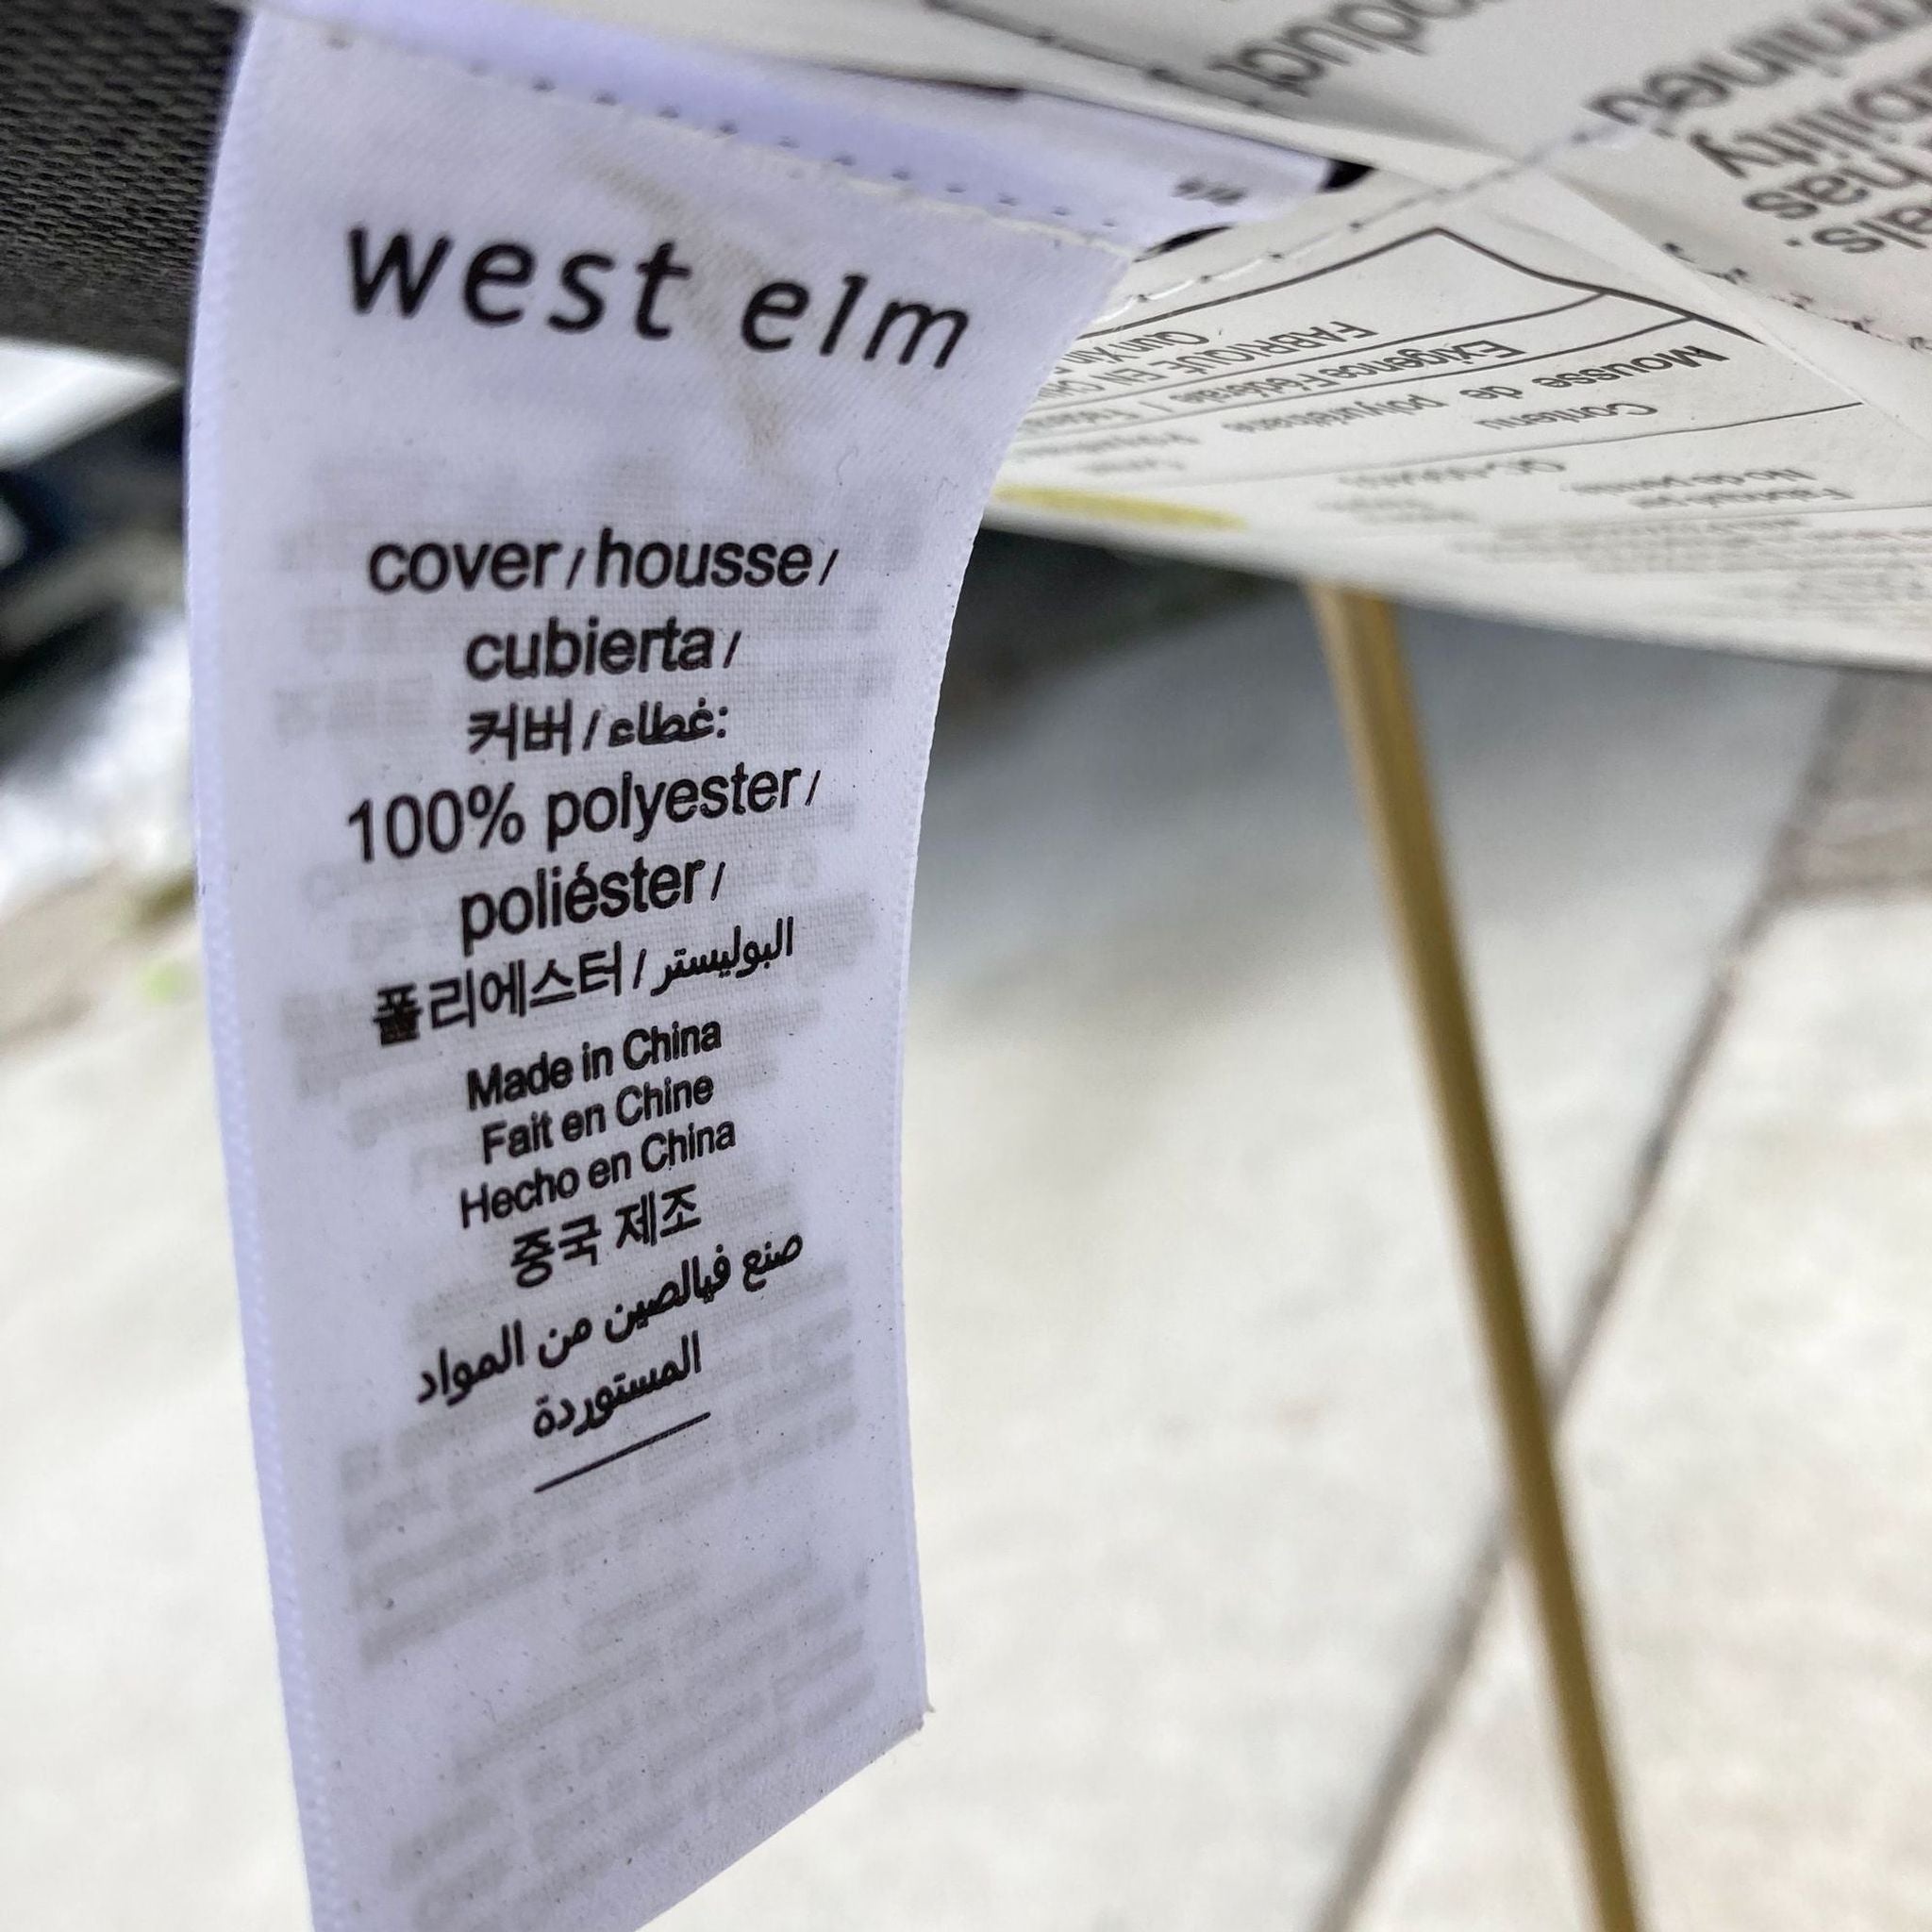 Label from a West Elm Slope dining chair showing material and manufacturing information, multi-language text.